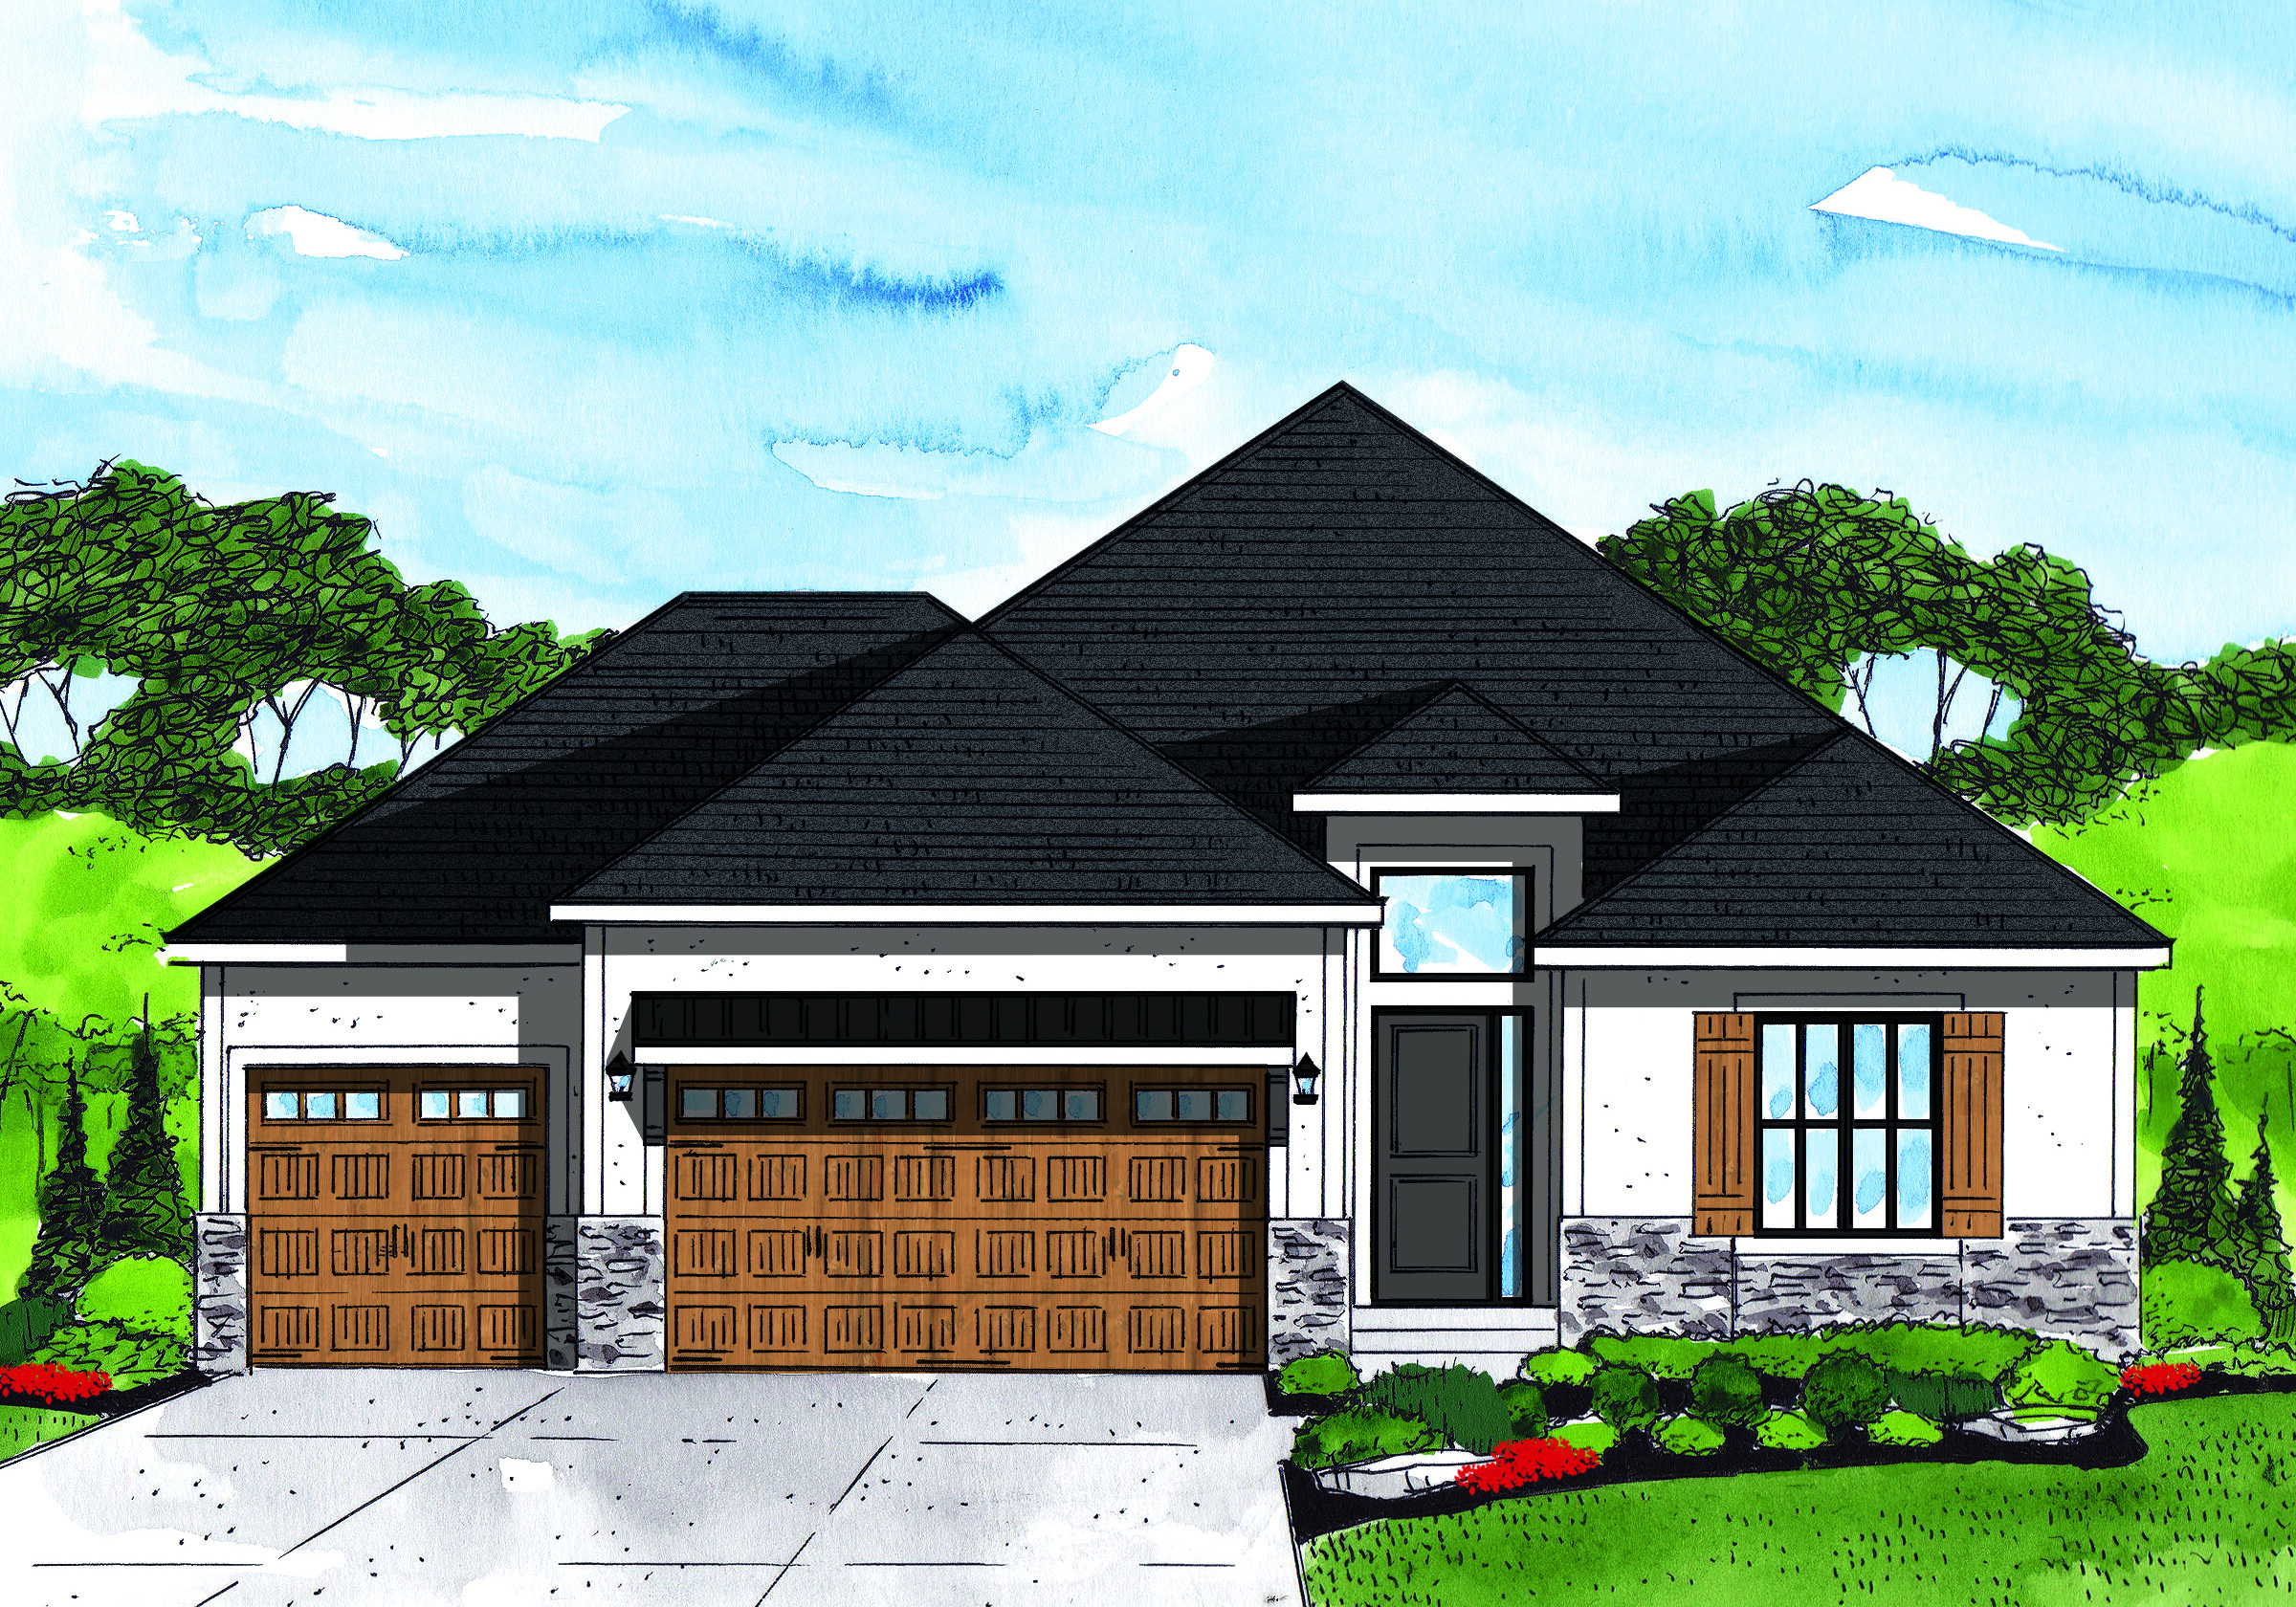 A drawing of a house with two garage doors.